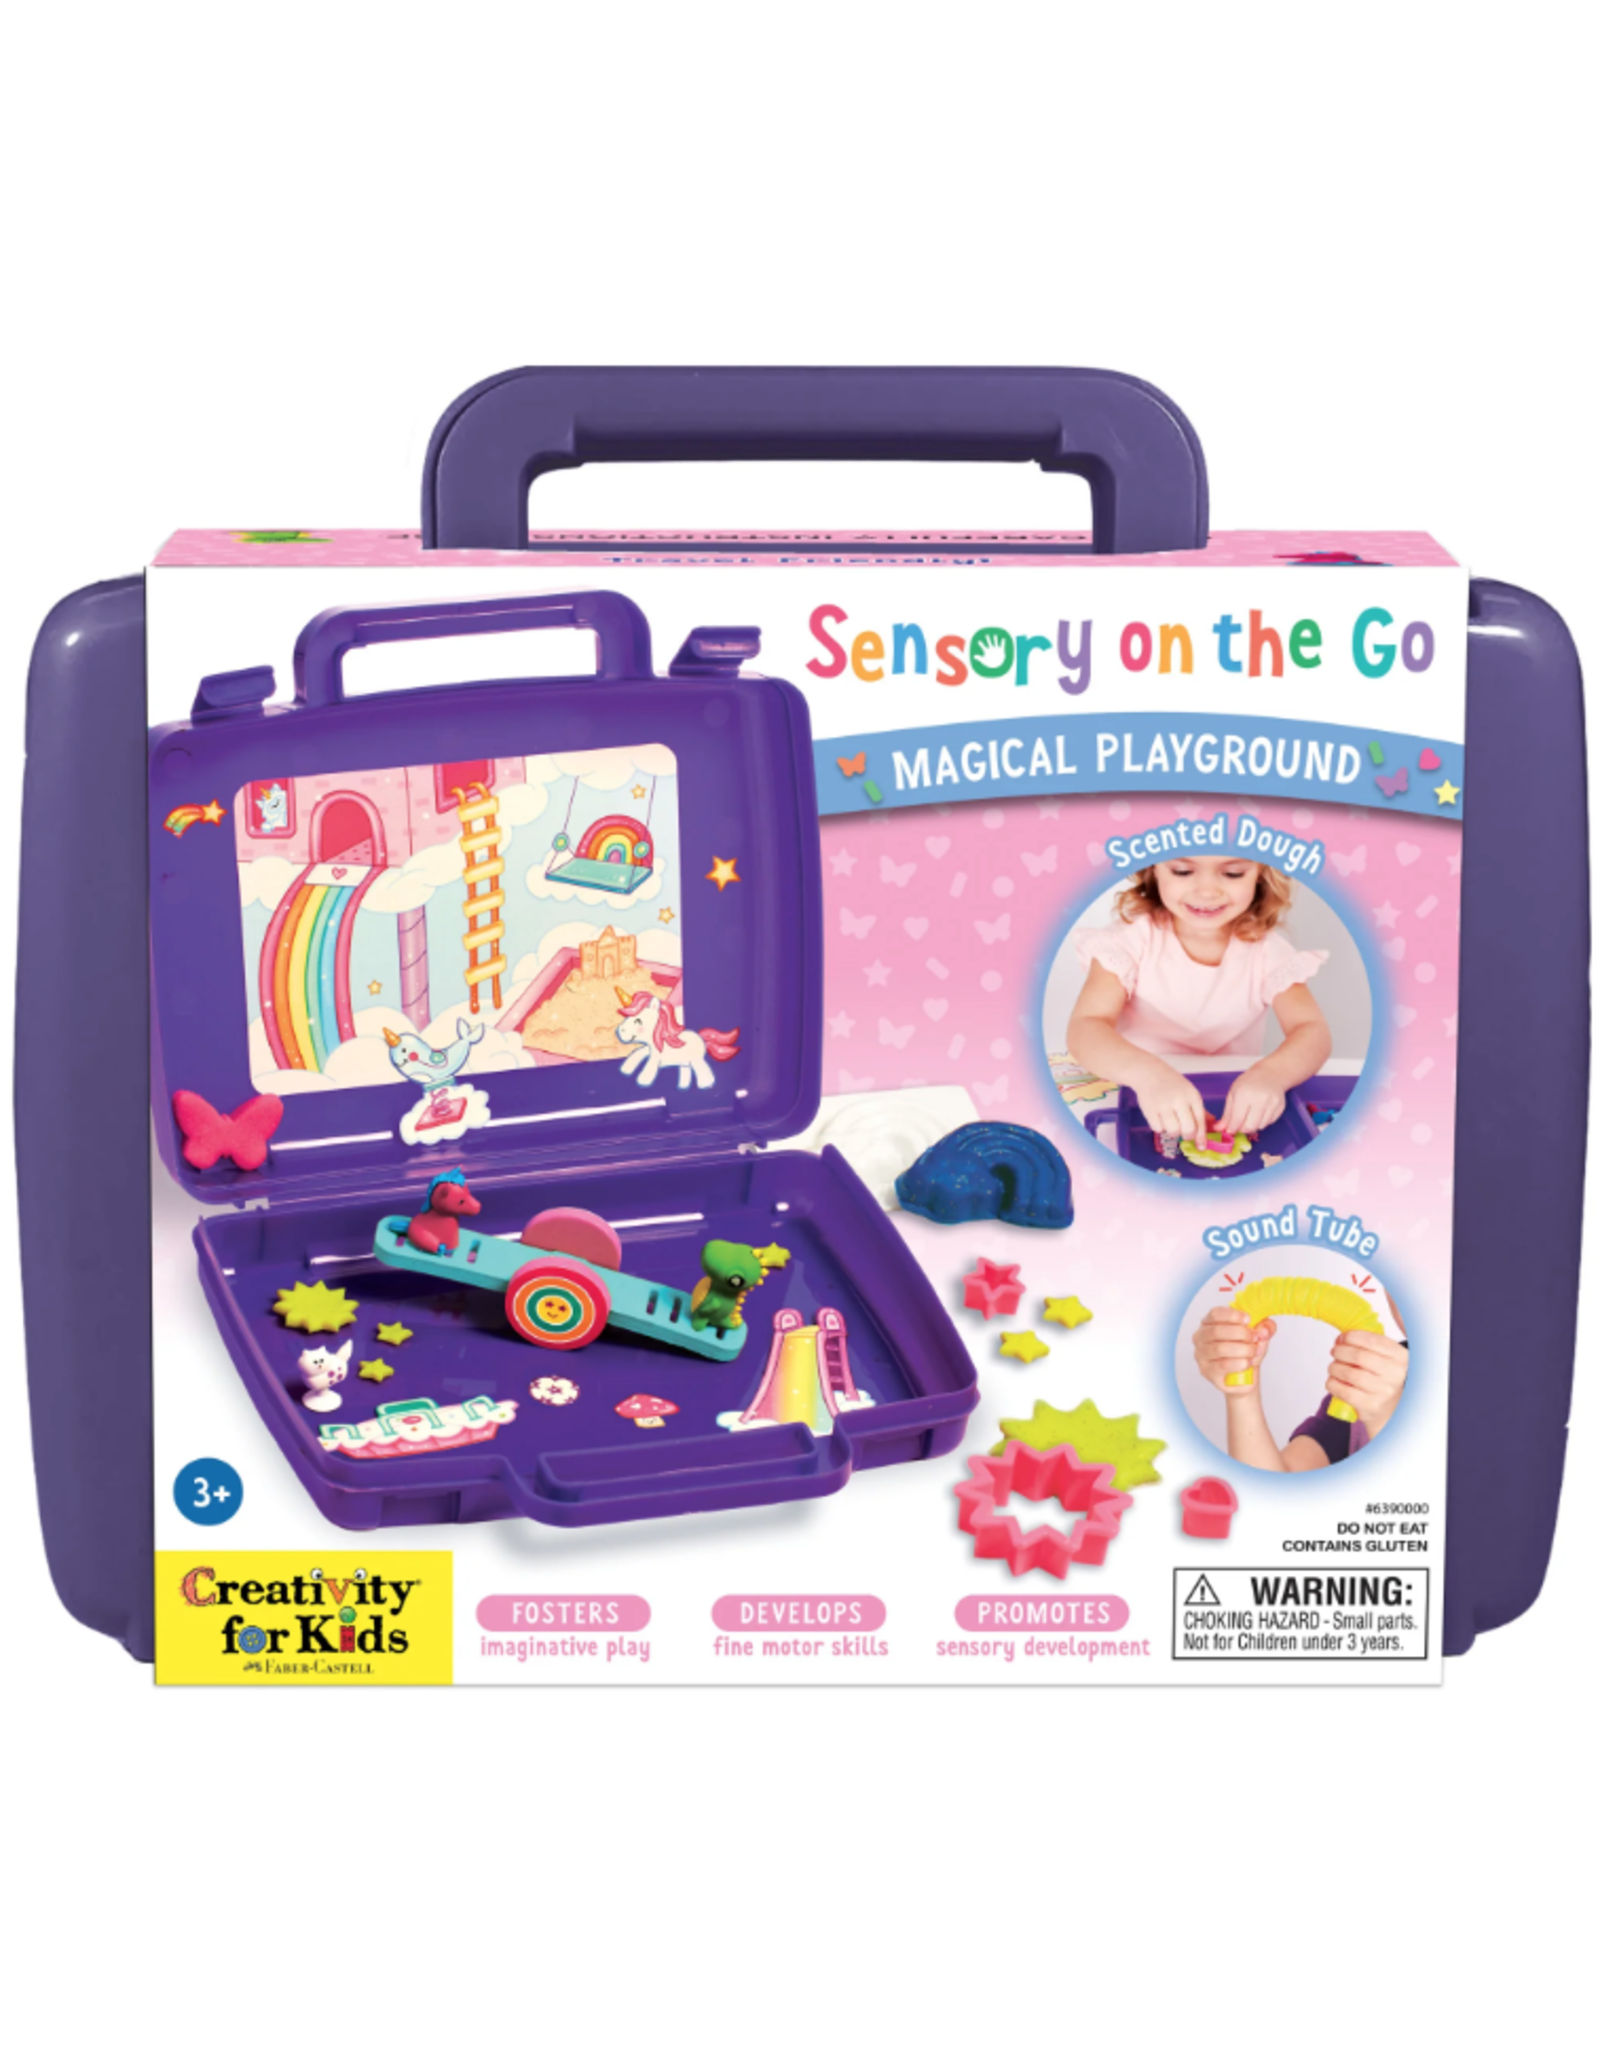 Creativity For Kids Sensory on the Go Magical Playground